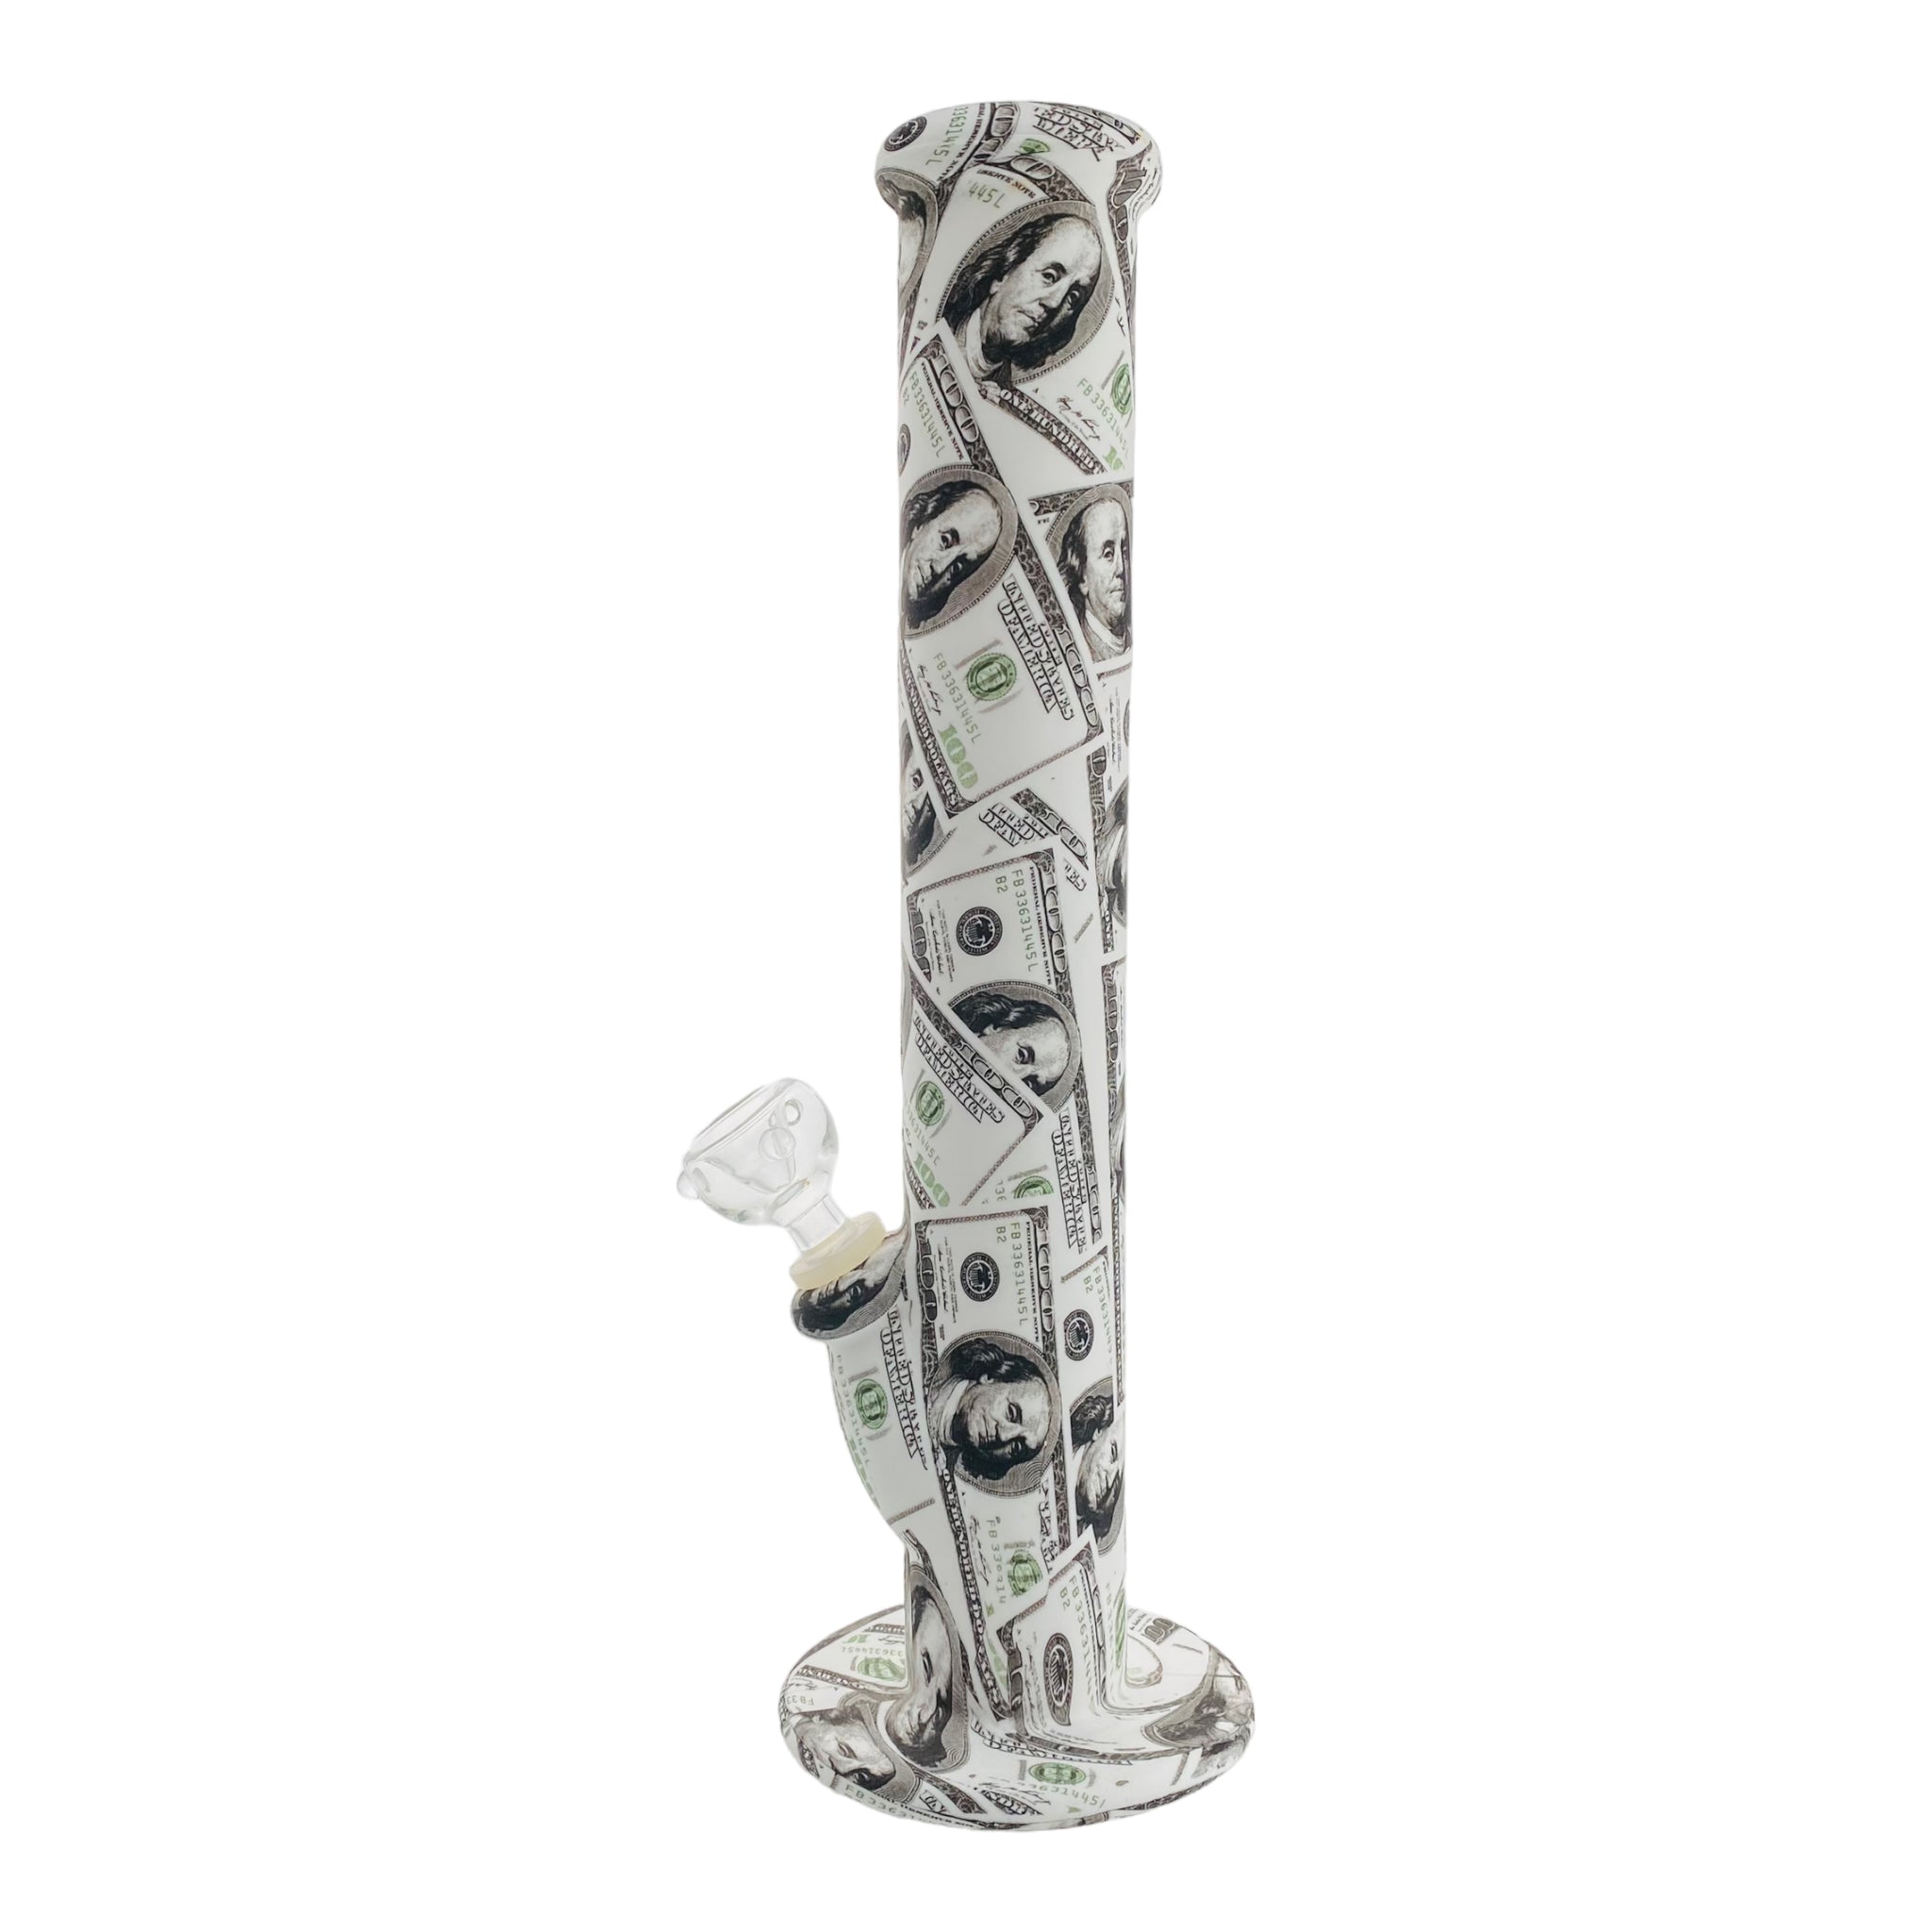 12 Inch Silicone Straight Bong With $100 Bills